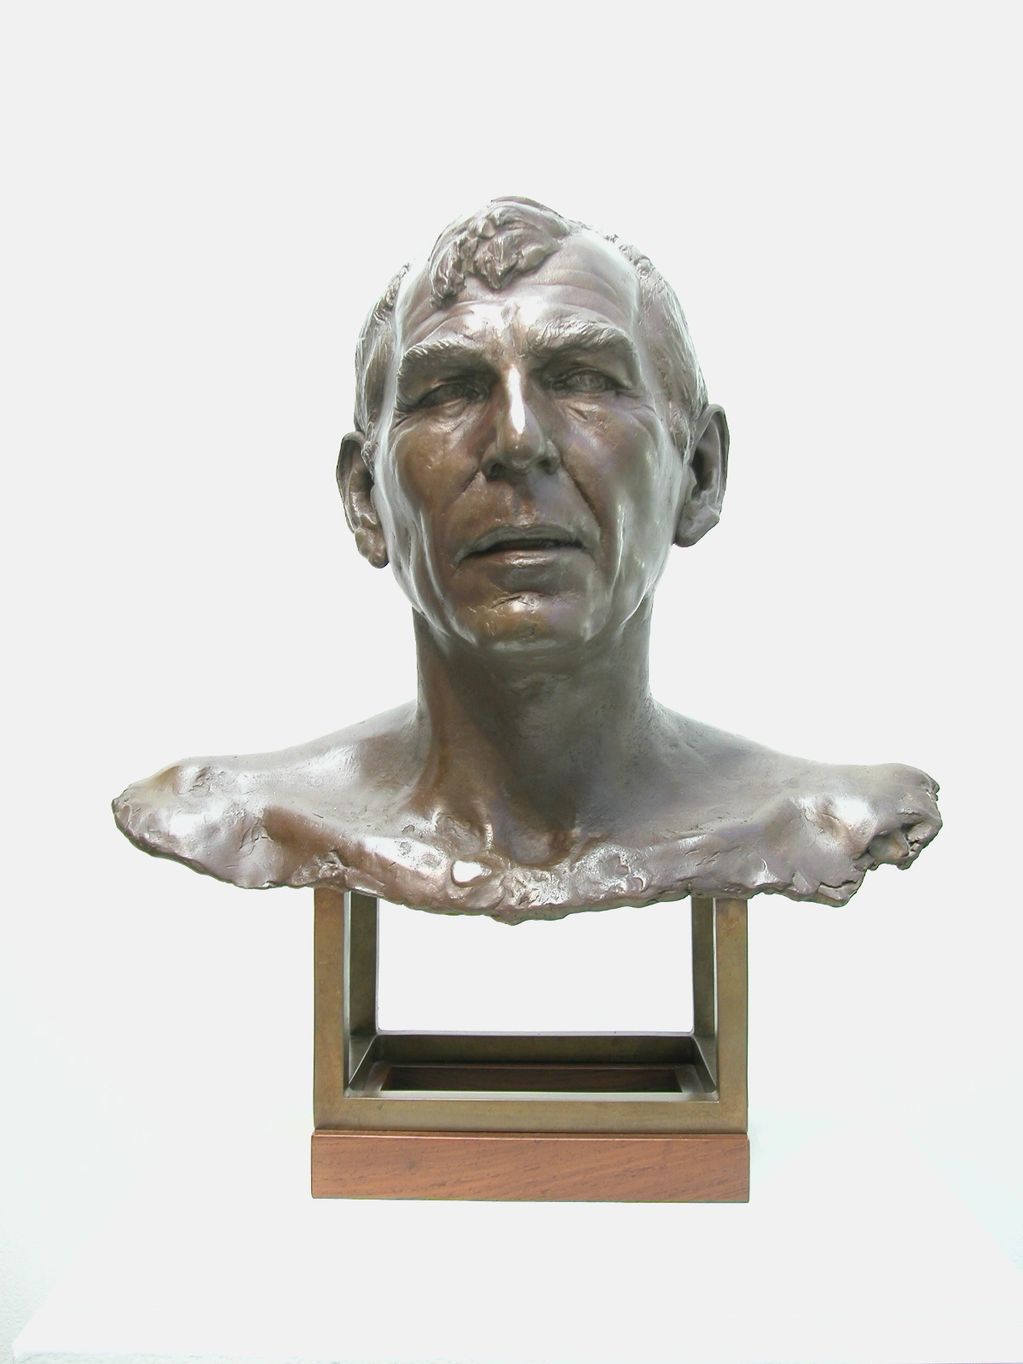 Life size bronze portrait bust of Stephen Werlick by Thomas Marsh